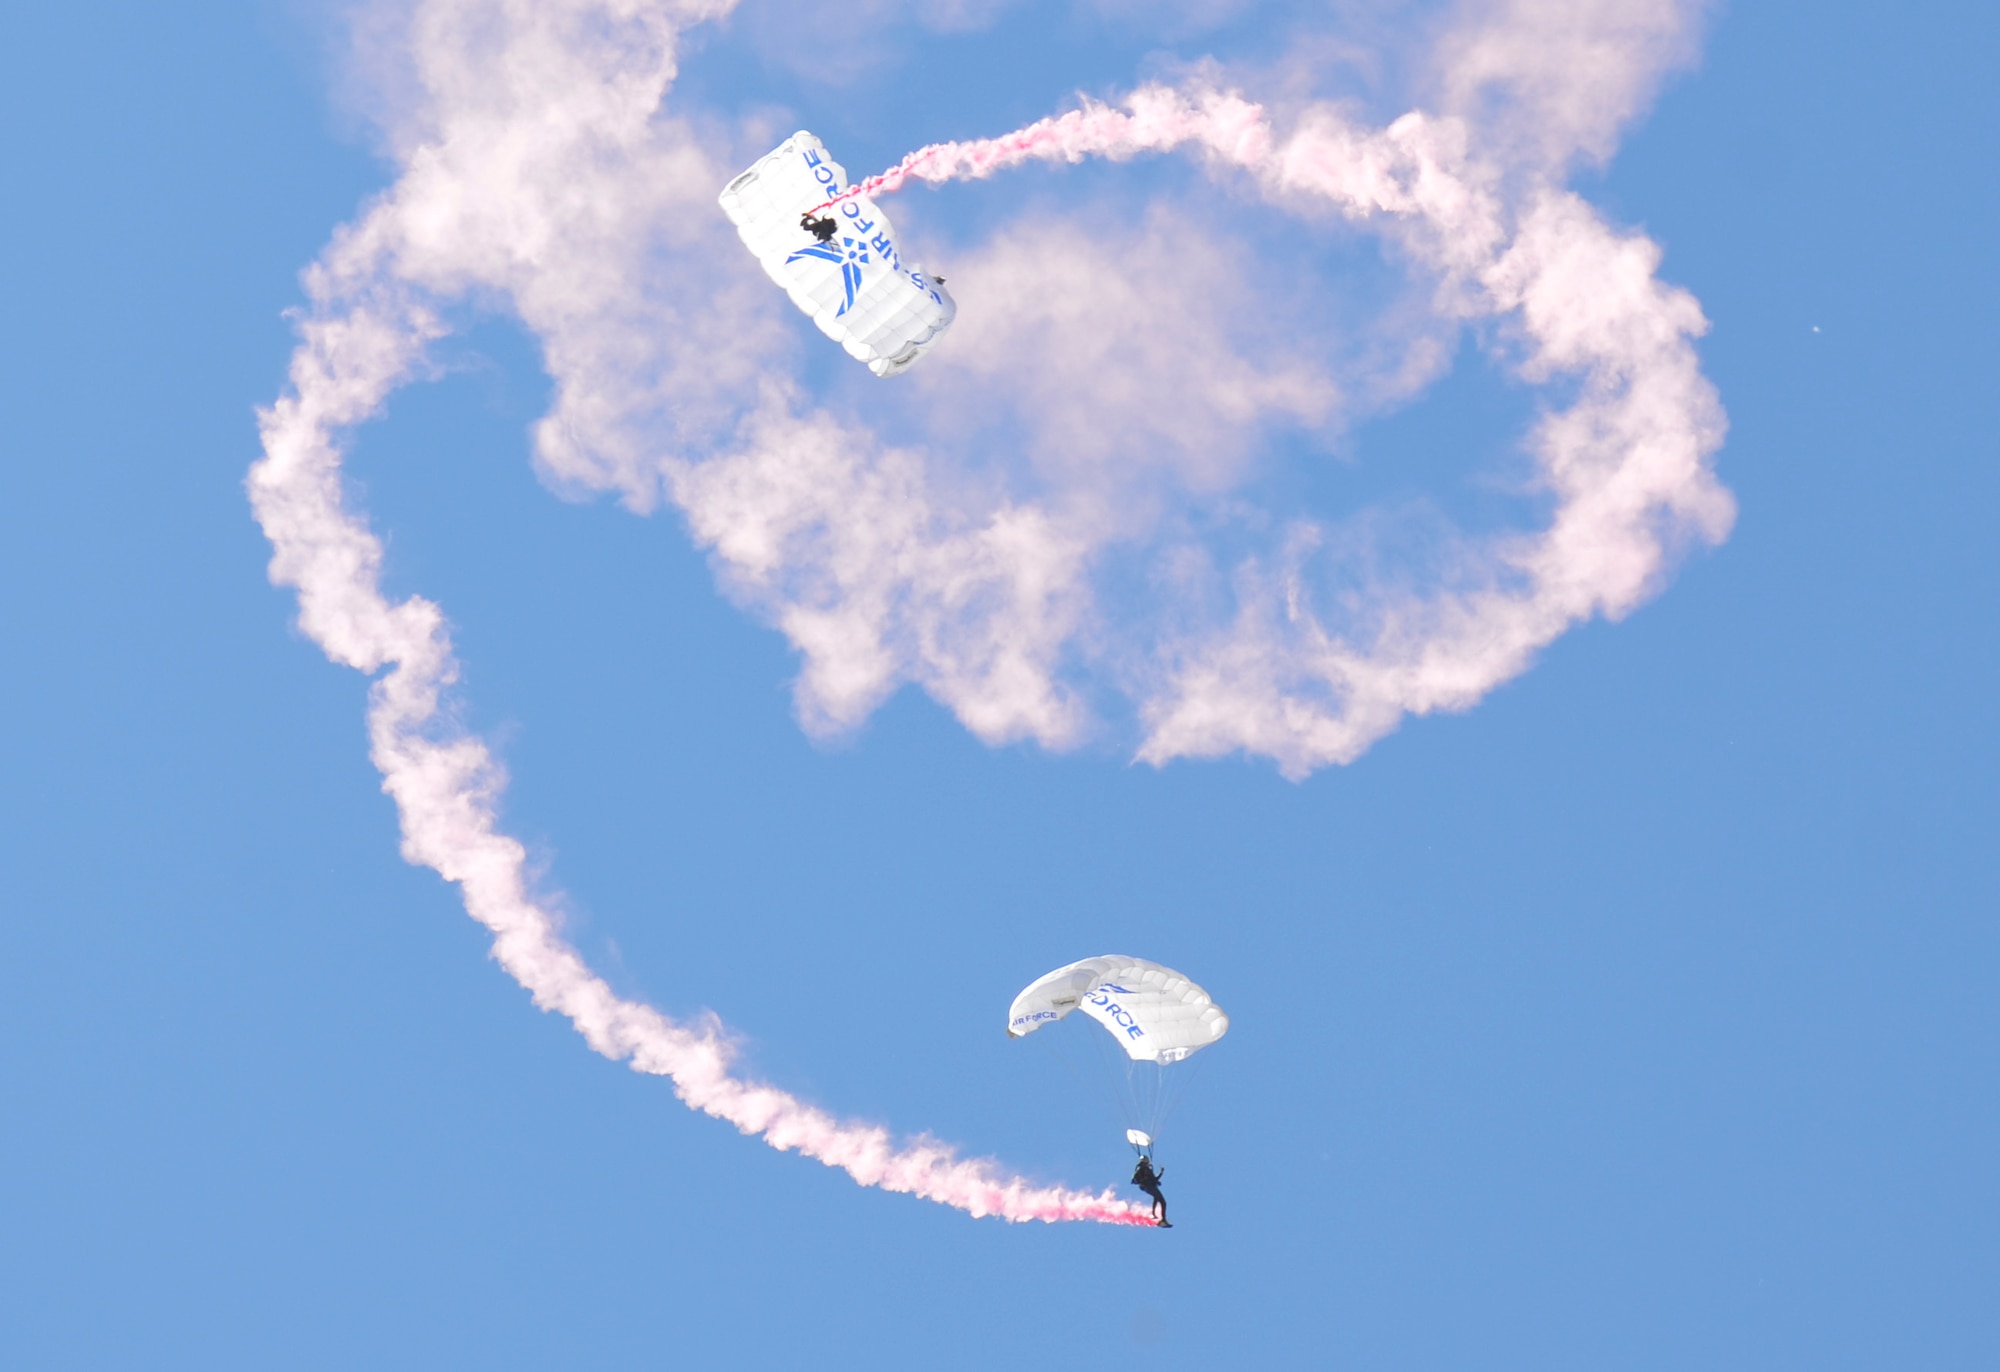 Members of the United States Air Force Academy's Wings of Blue Parachute Team stream down from the sky at the Heritage to Horizon Air Show at Maxwell Air Force Base